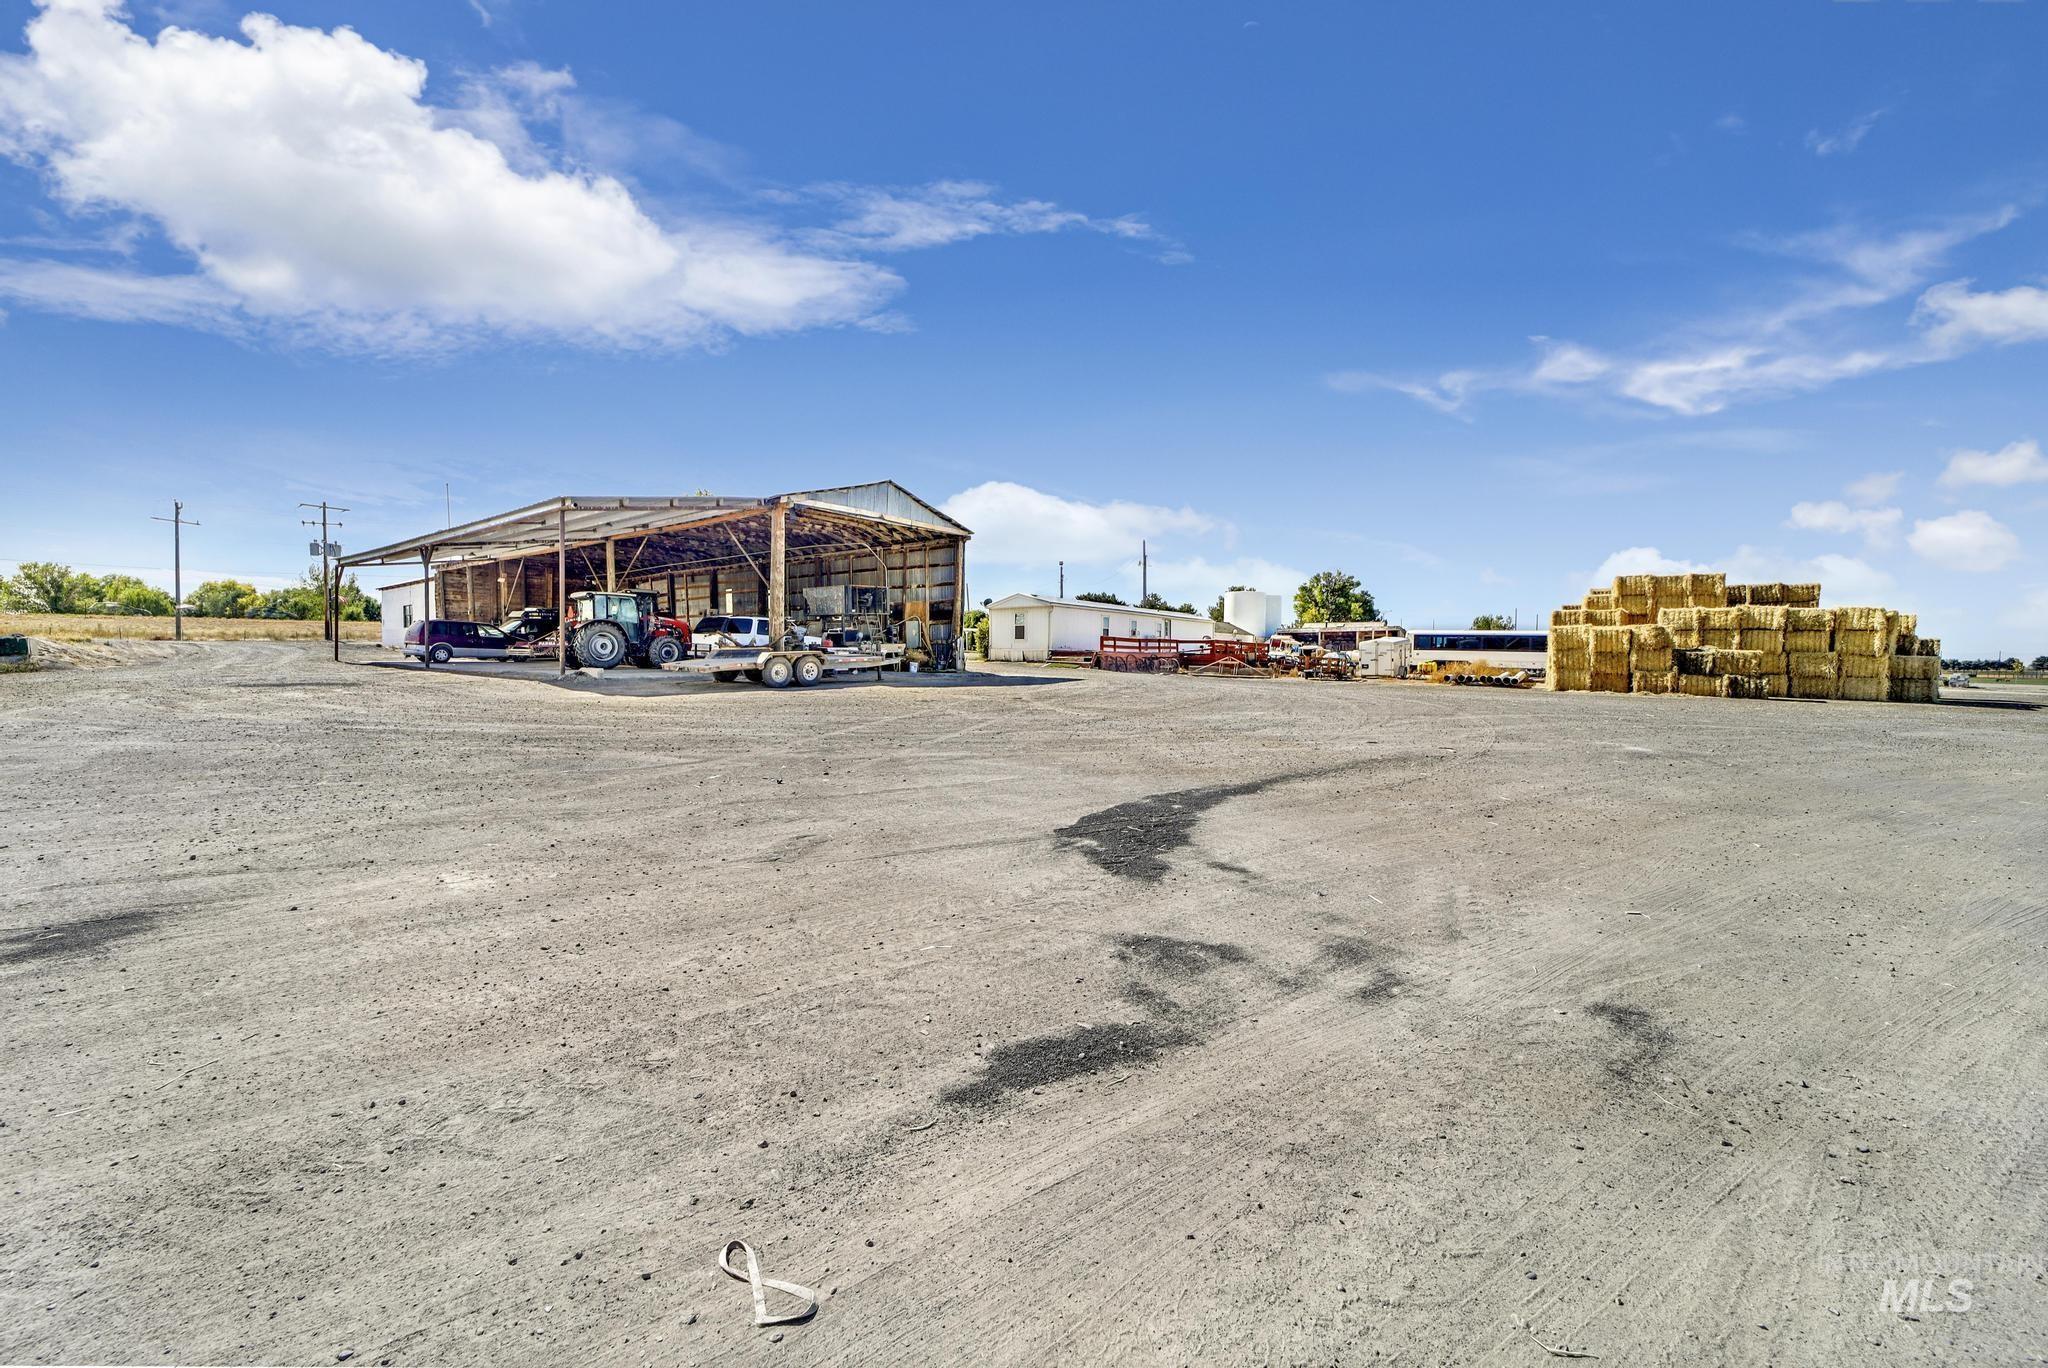 21234 Hwy 30 Filer ID 83328, Filer, Idaho 83328, Business/Commercial For Sale, Price $9,999,999,MLS 98891300